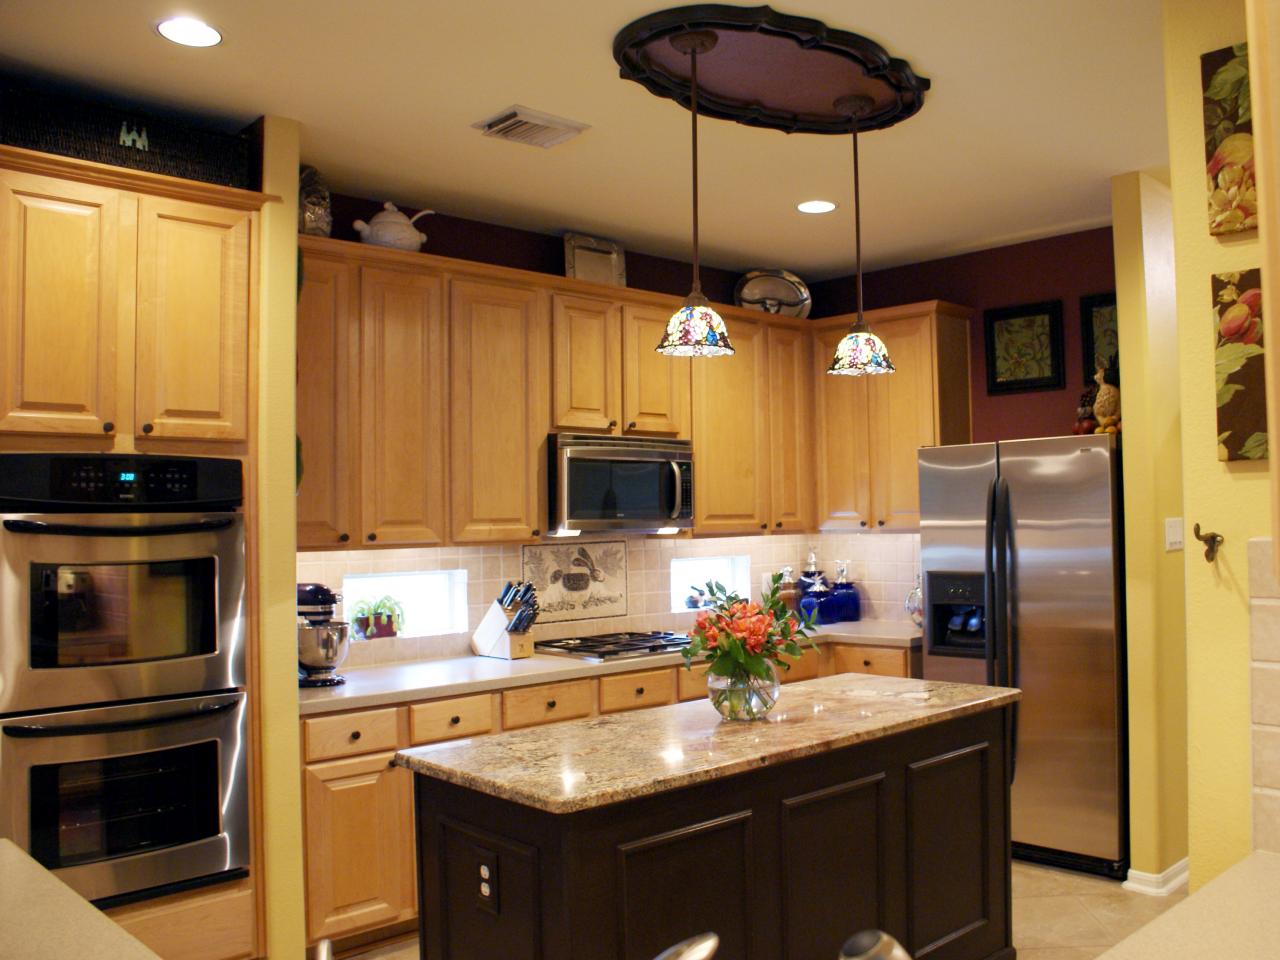 Cabinets Should You Replace Or Reface, All New Cabinets Cost